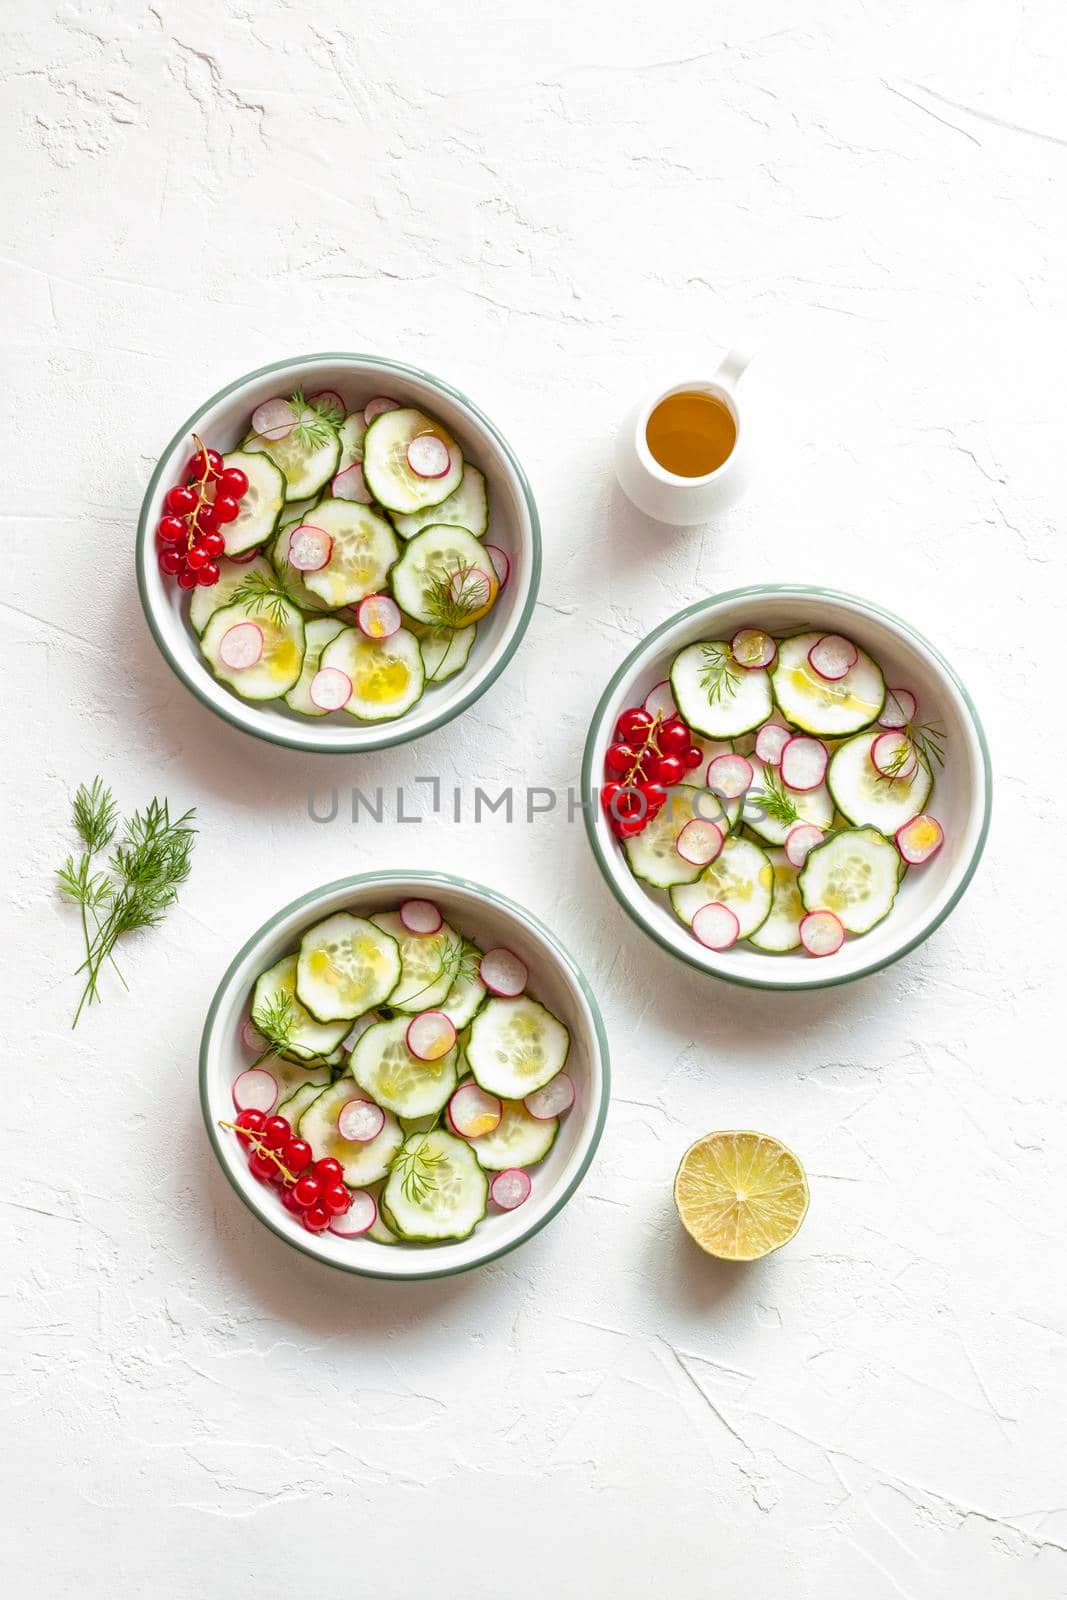 radish and cucumber salad served in three round bowls decorated with red currants, white concrete background, top view